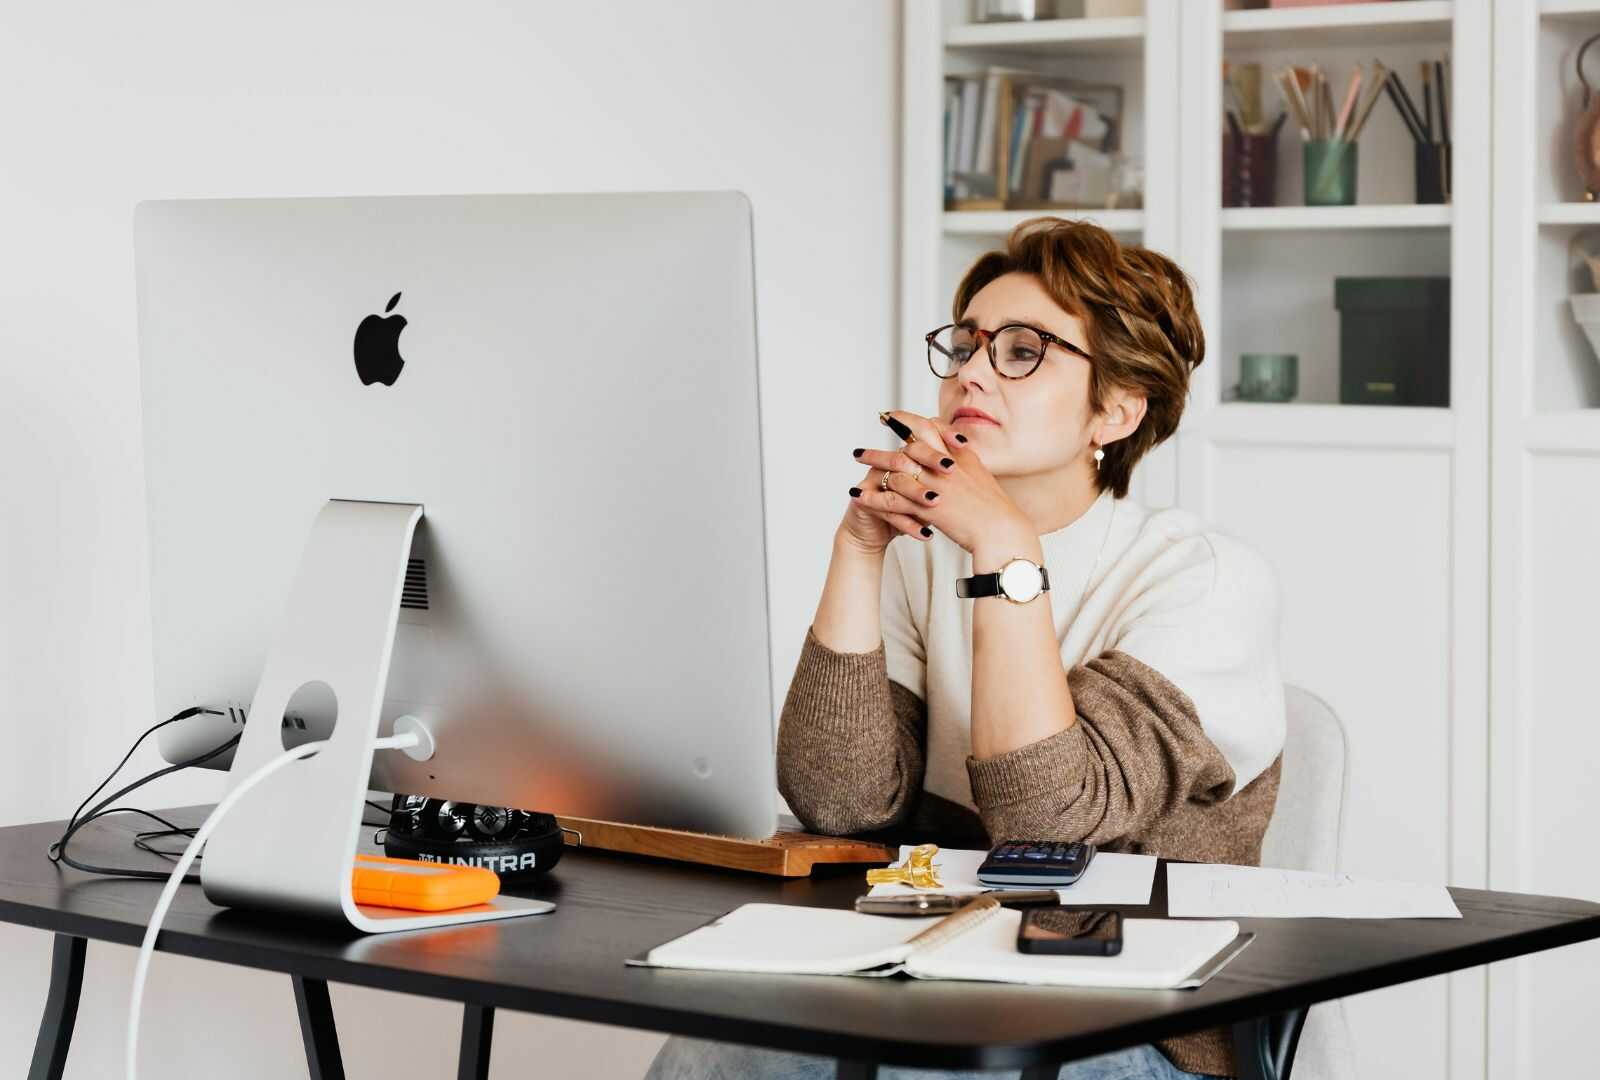 woman looking at computer thoughtfully